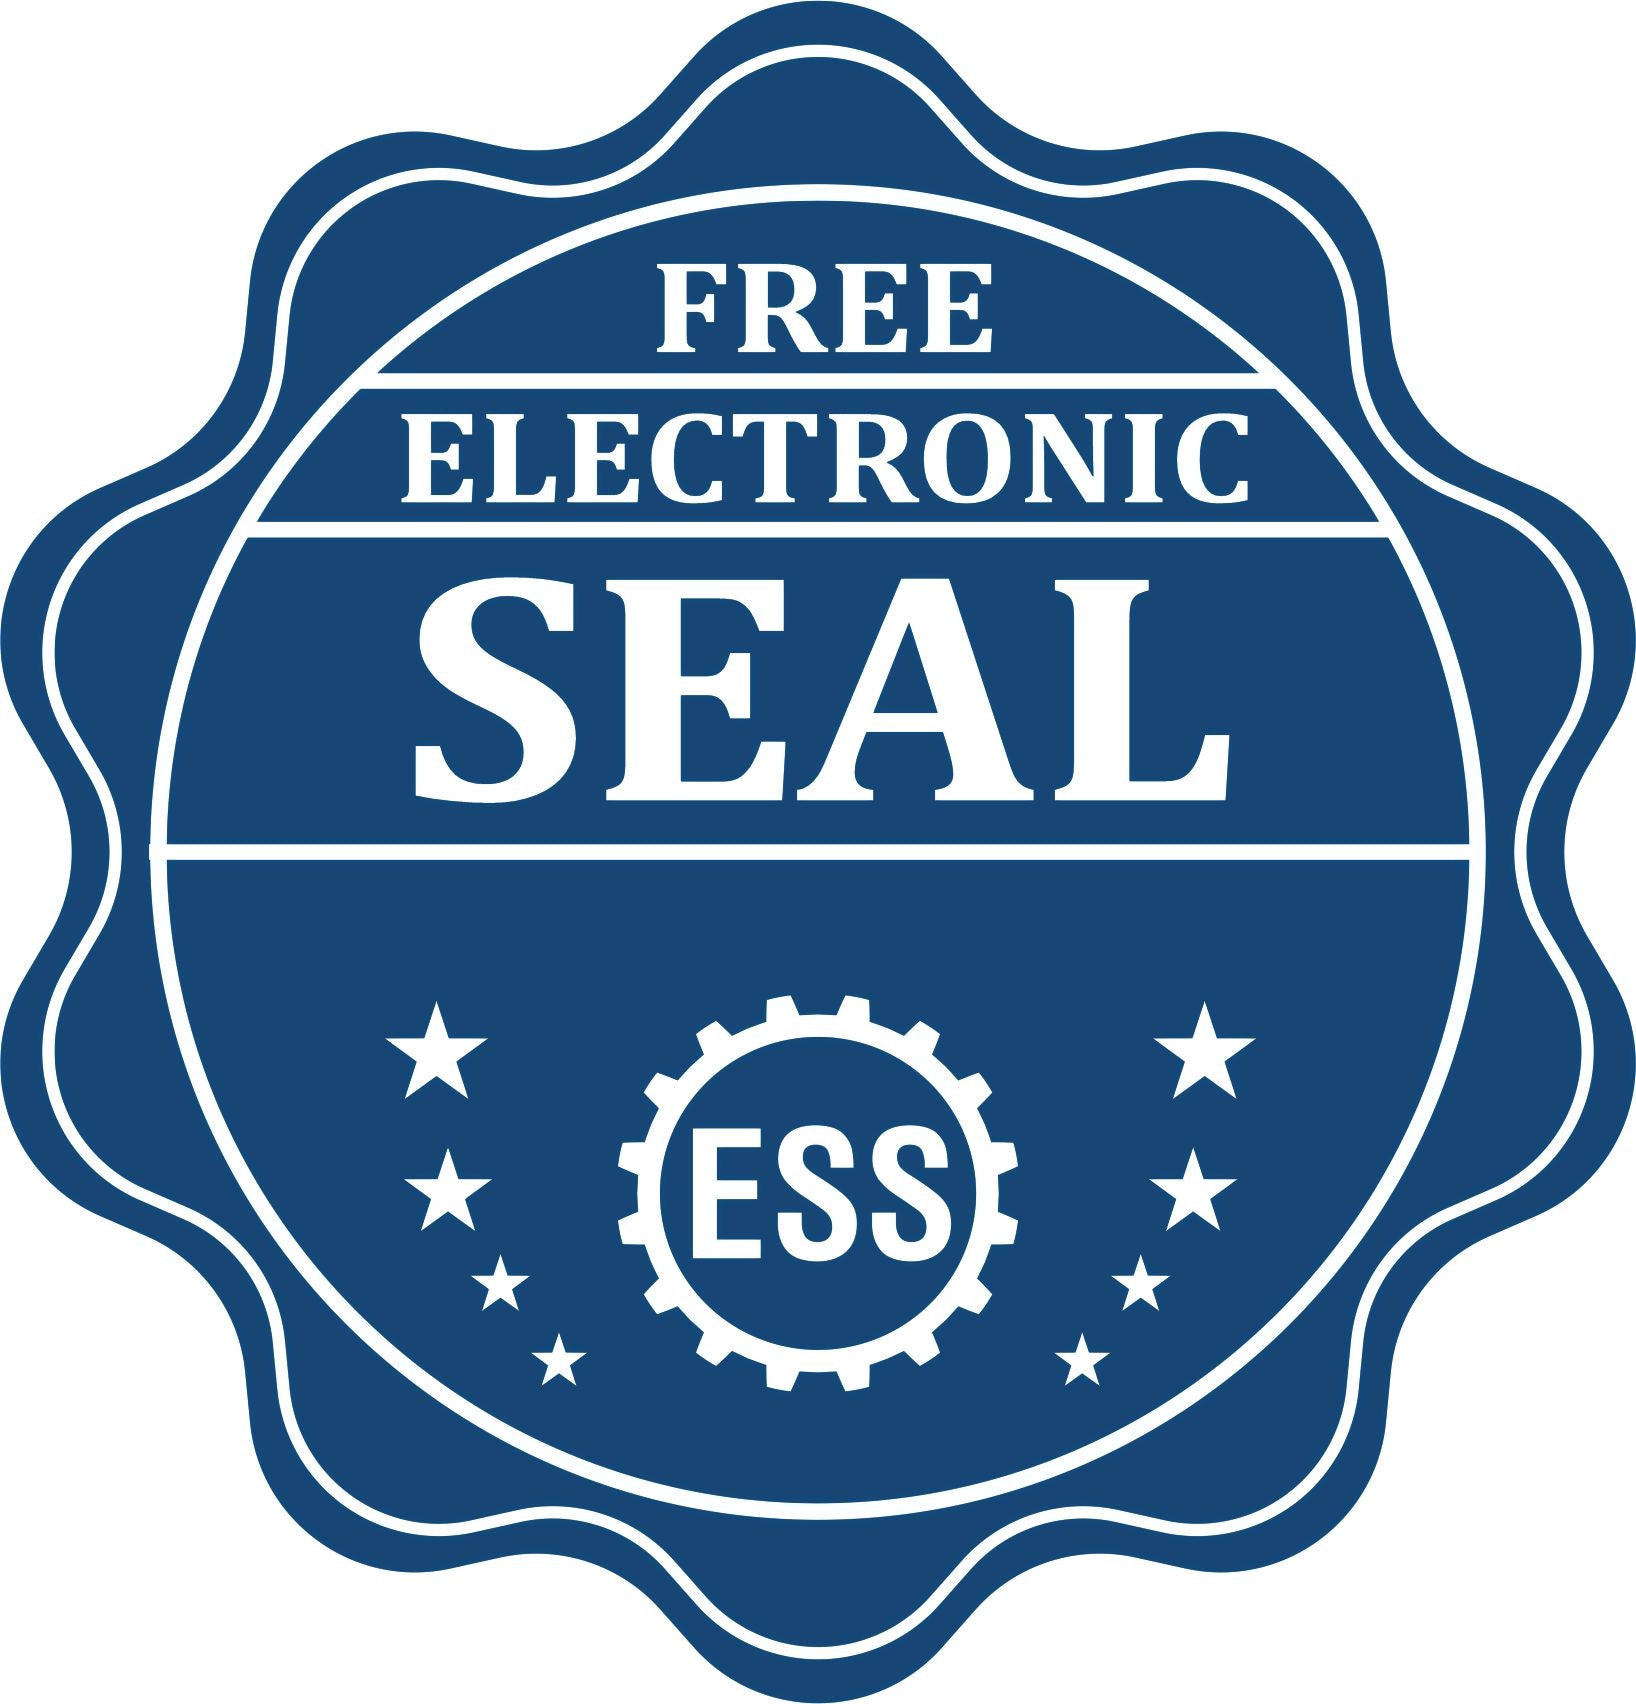 A badge showing a free electronic seal for the Hybrid Arizona Geologist Seal with stars and the ESS gear on the emblem.